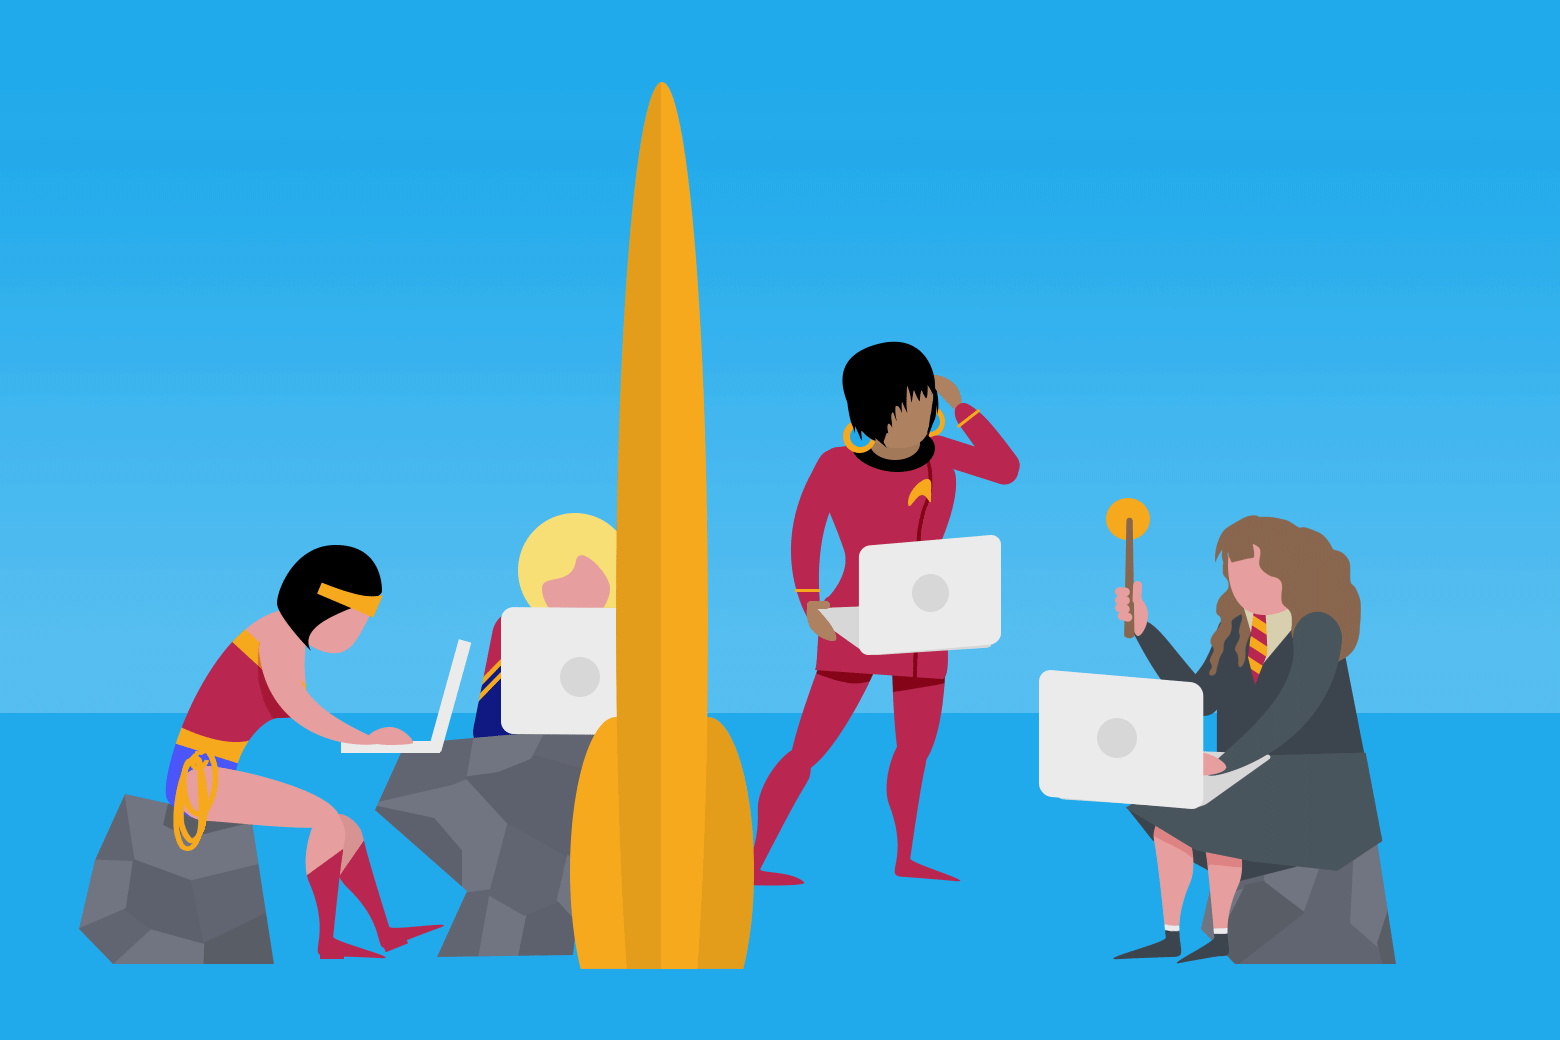 Illustration of Hermione, Captain Marvel, Wonder Woman, and Uhura working on computers.